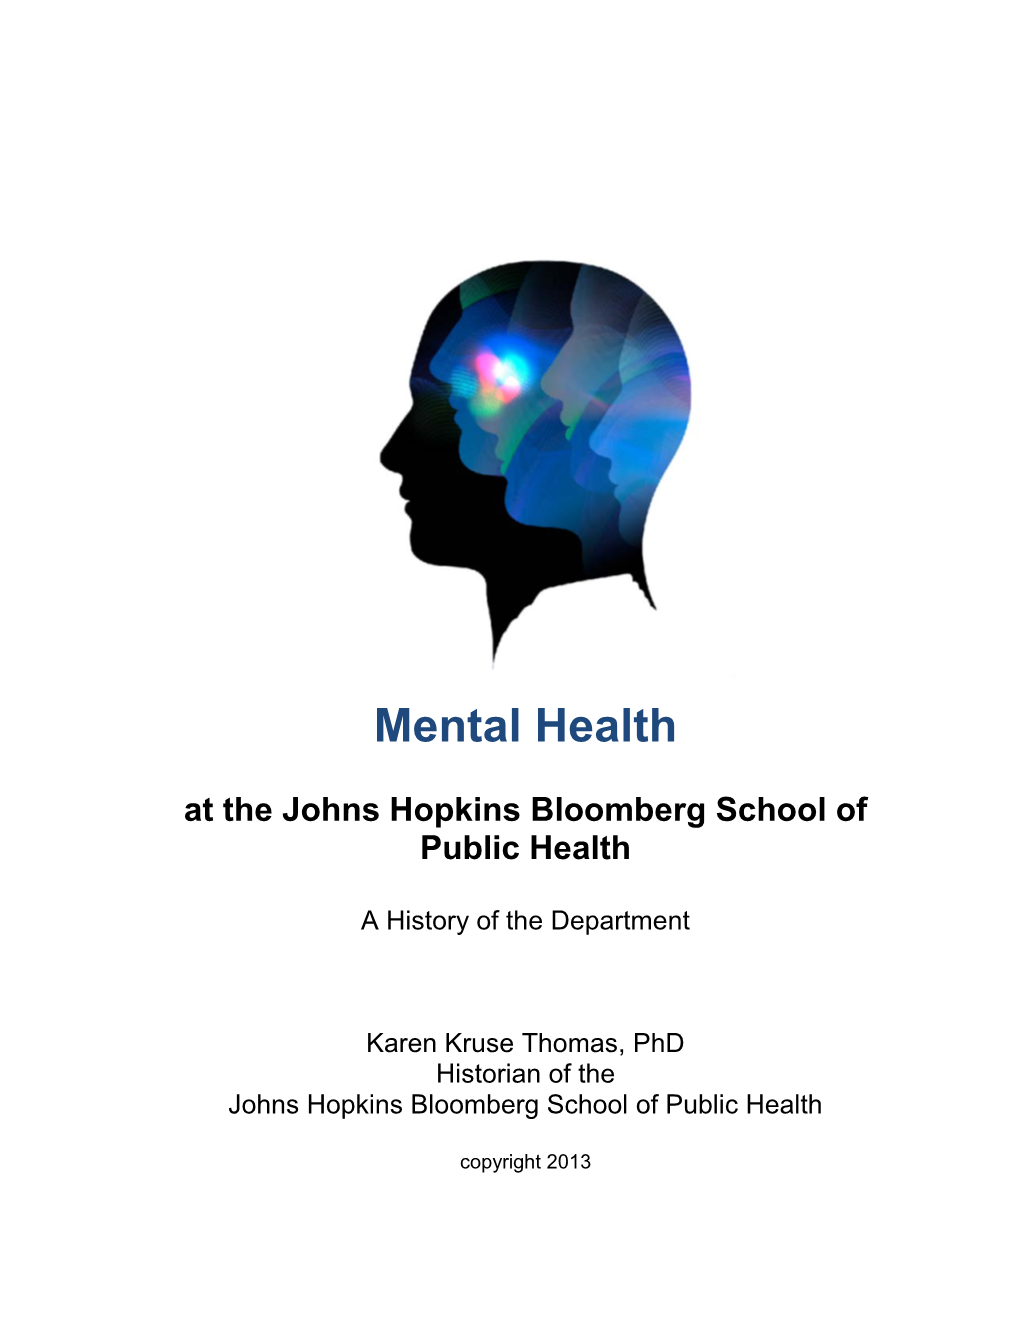 Mental Health at the Johns Hopkins Bloomberg School of Public Health